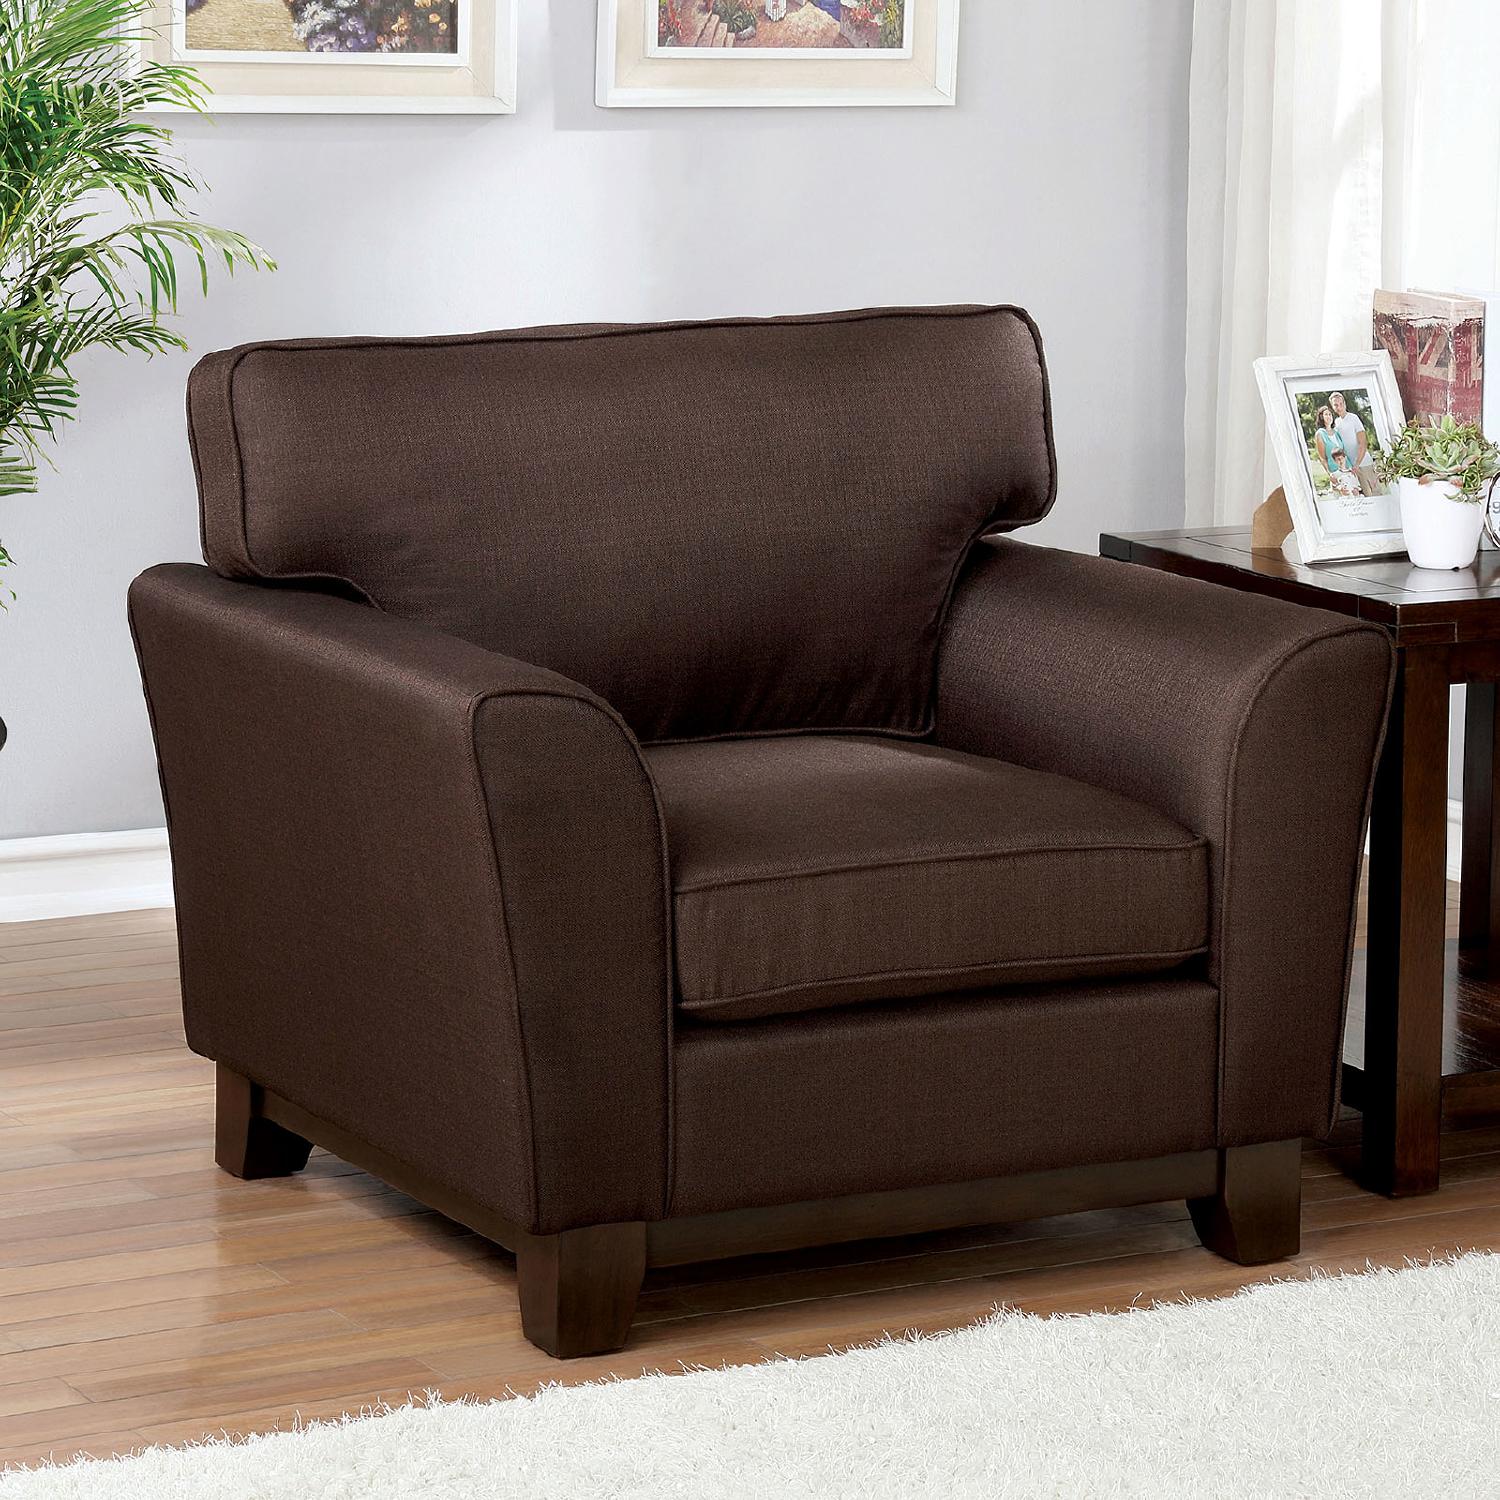 Transitional Arm Chair CM6954BR-CH Caldicot CM6954BR-CH in Brown Chenille